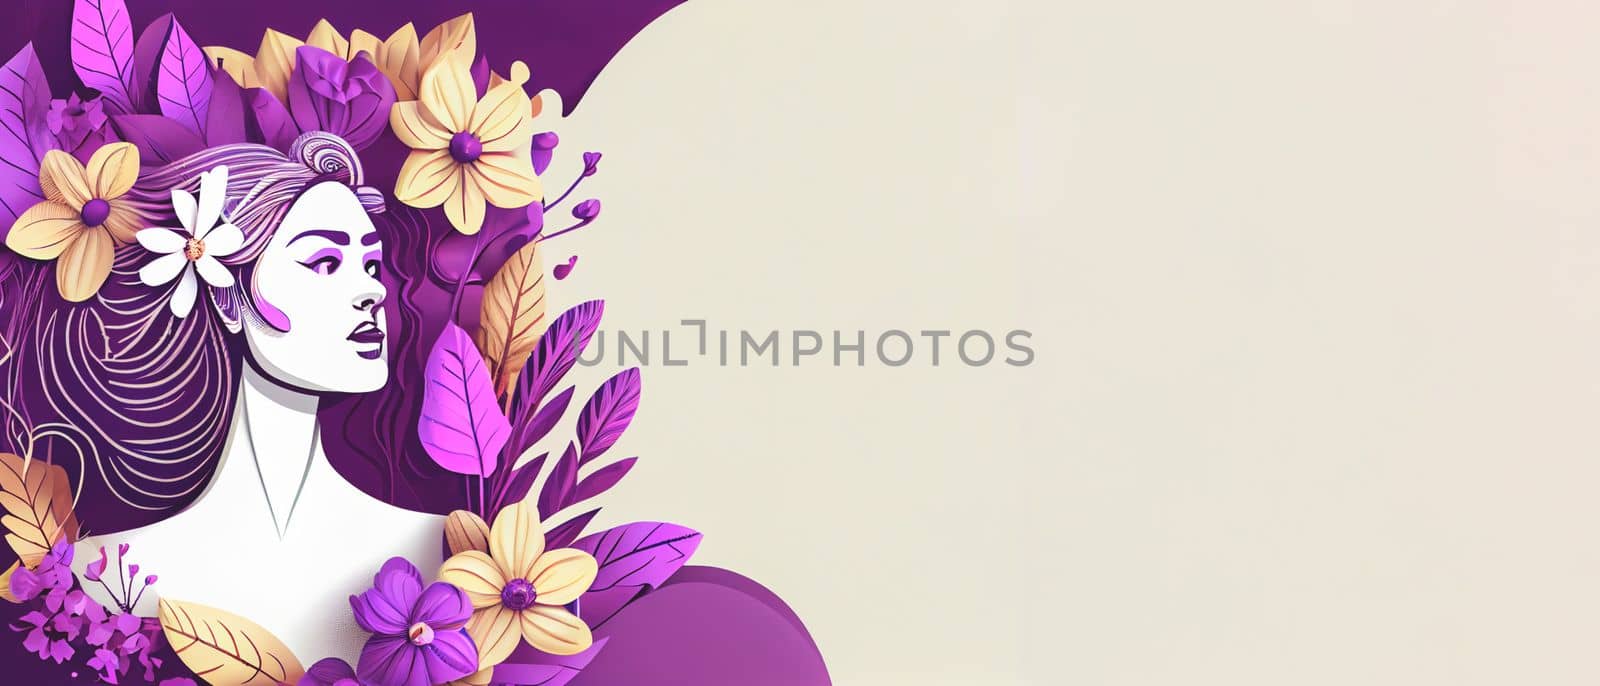 International Women's Day 8 march background with copy space. Woman Head Illustration from Side View Happy Women's Day. Template for UI, Web, Banner, or Greeting Card. Wide angle format banner